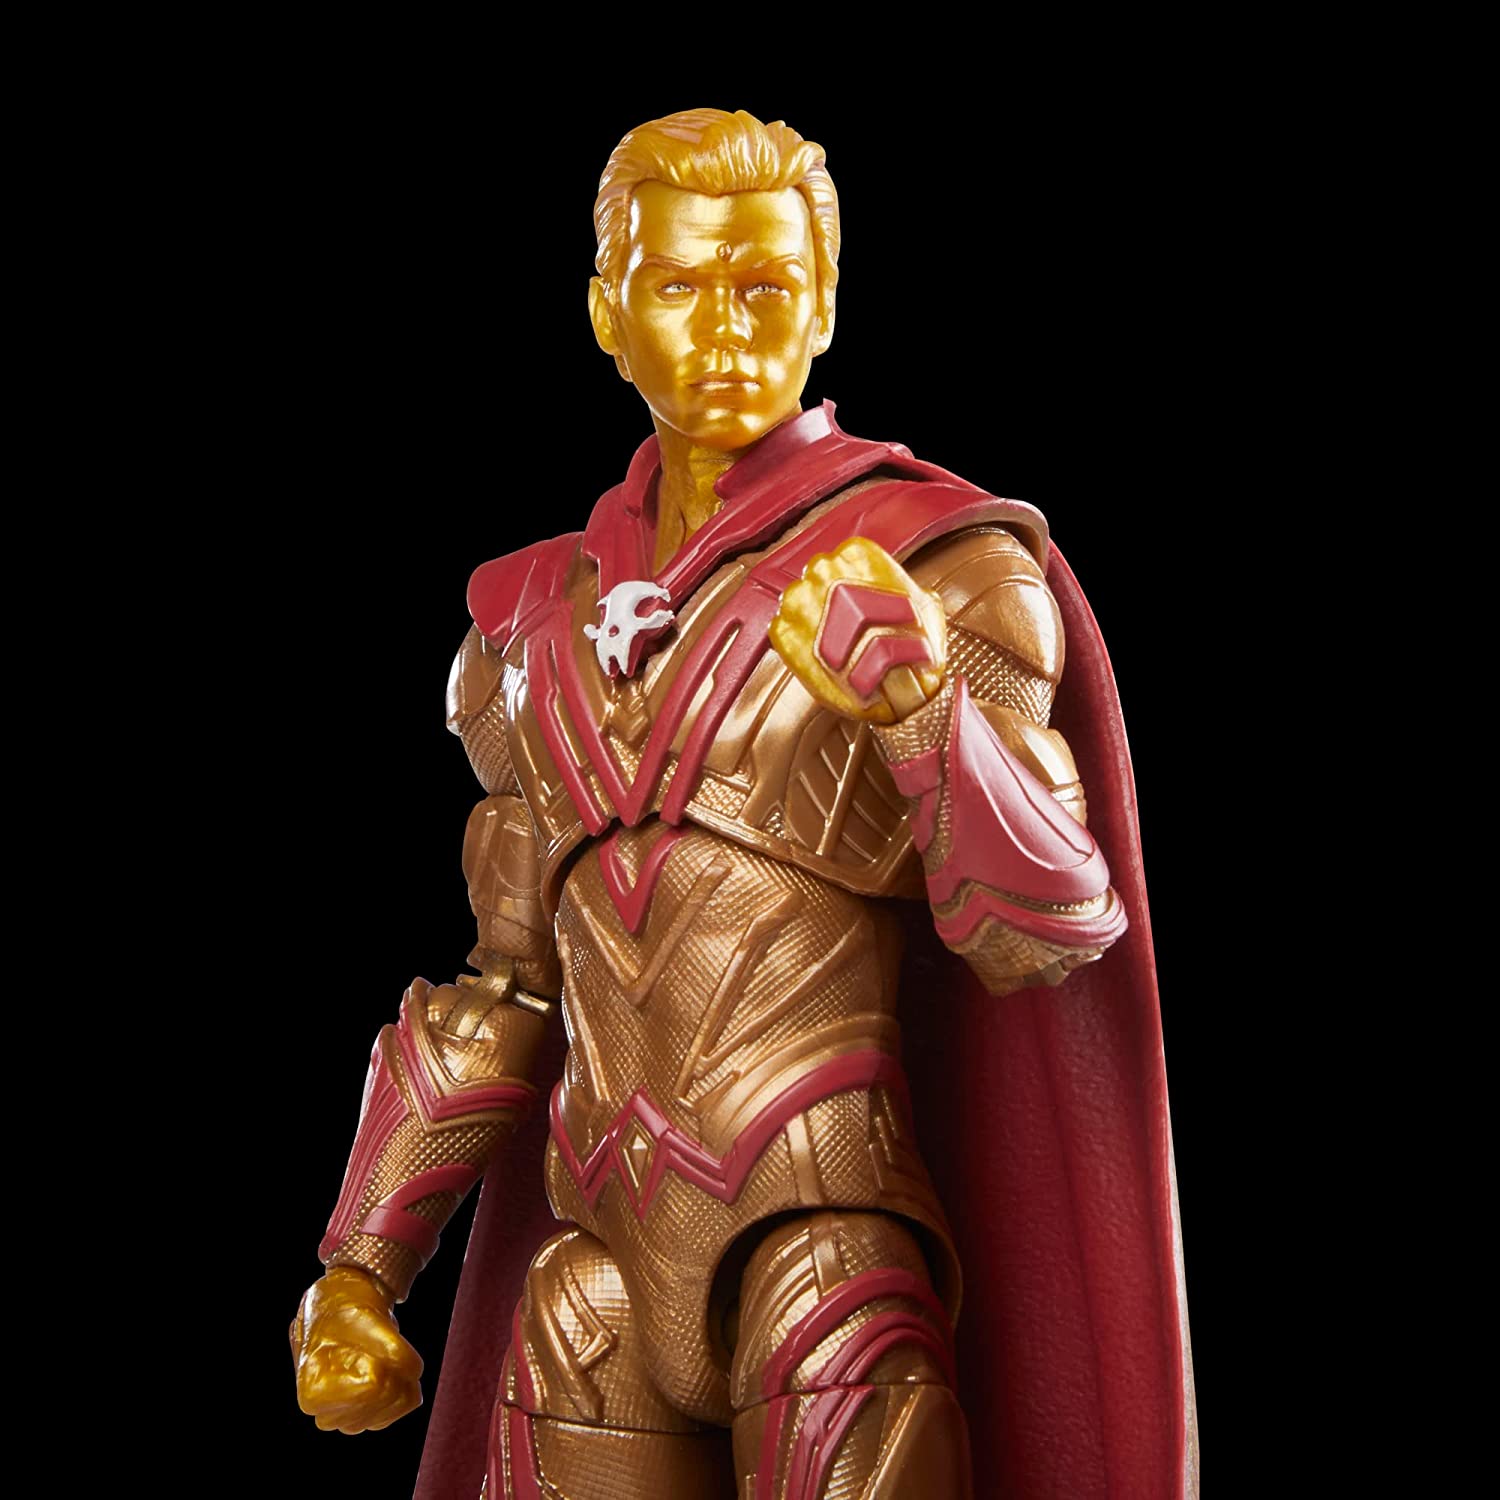  Guardians of the Galaxy Vol. 3 Marvel Legends Adam Warlock 6-Inch Action Figure Toy close up look